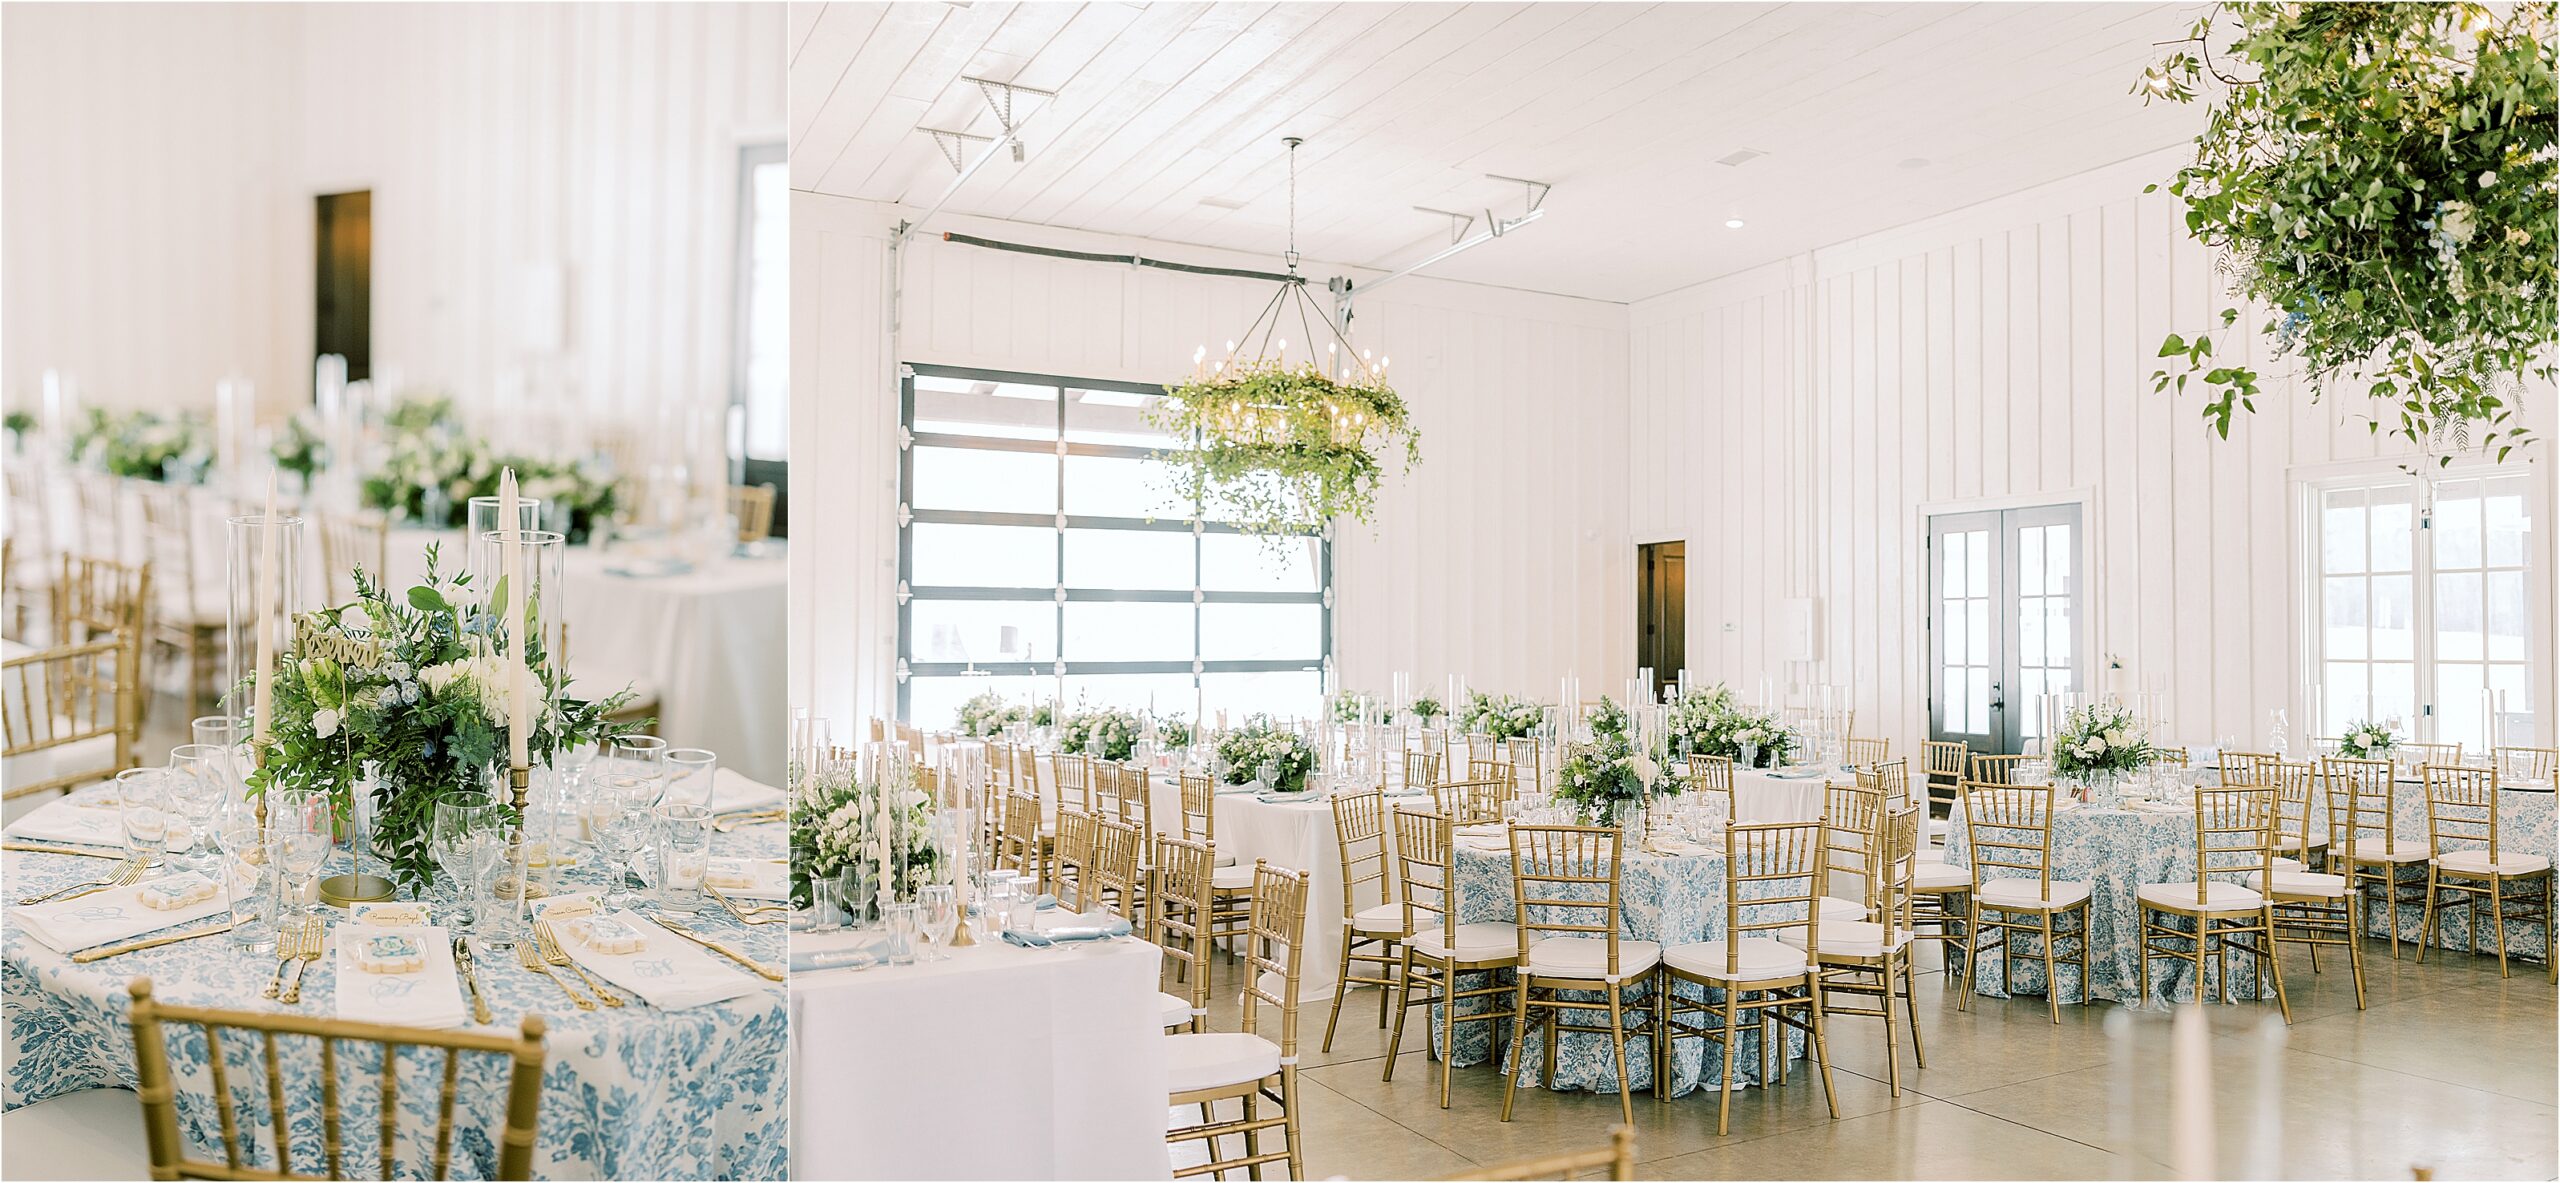 Banquet tables with gold chairs and blue and white pattern tablecloth.